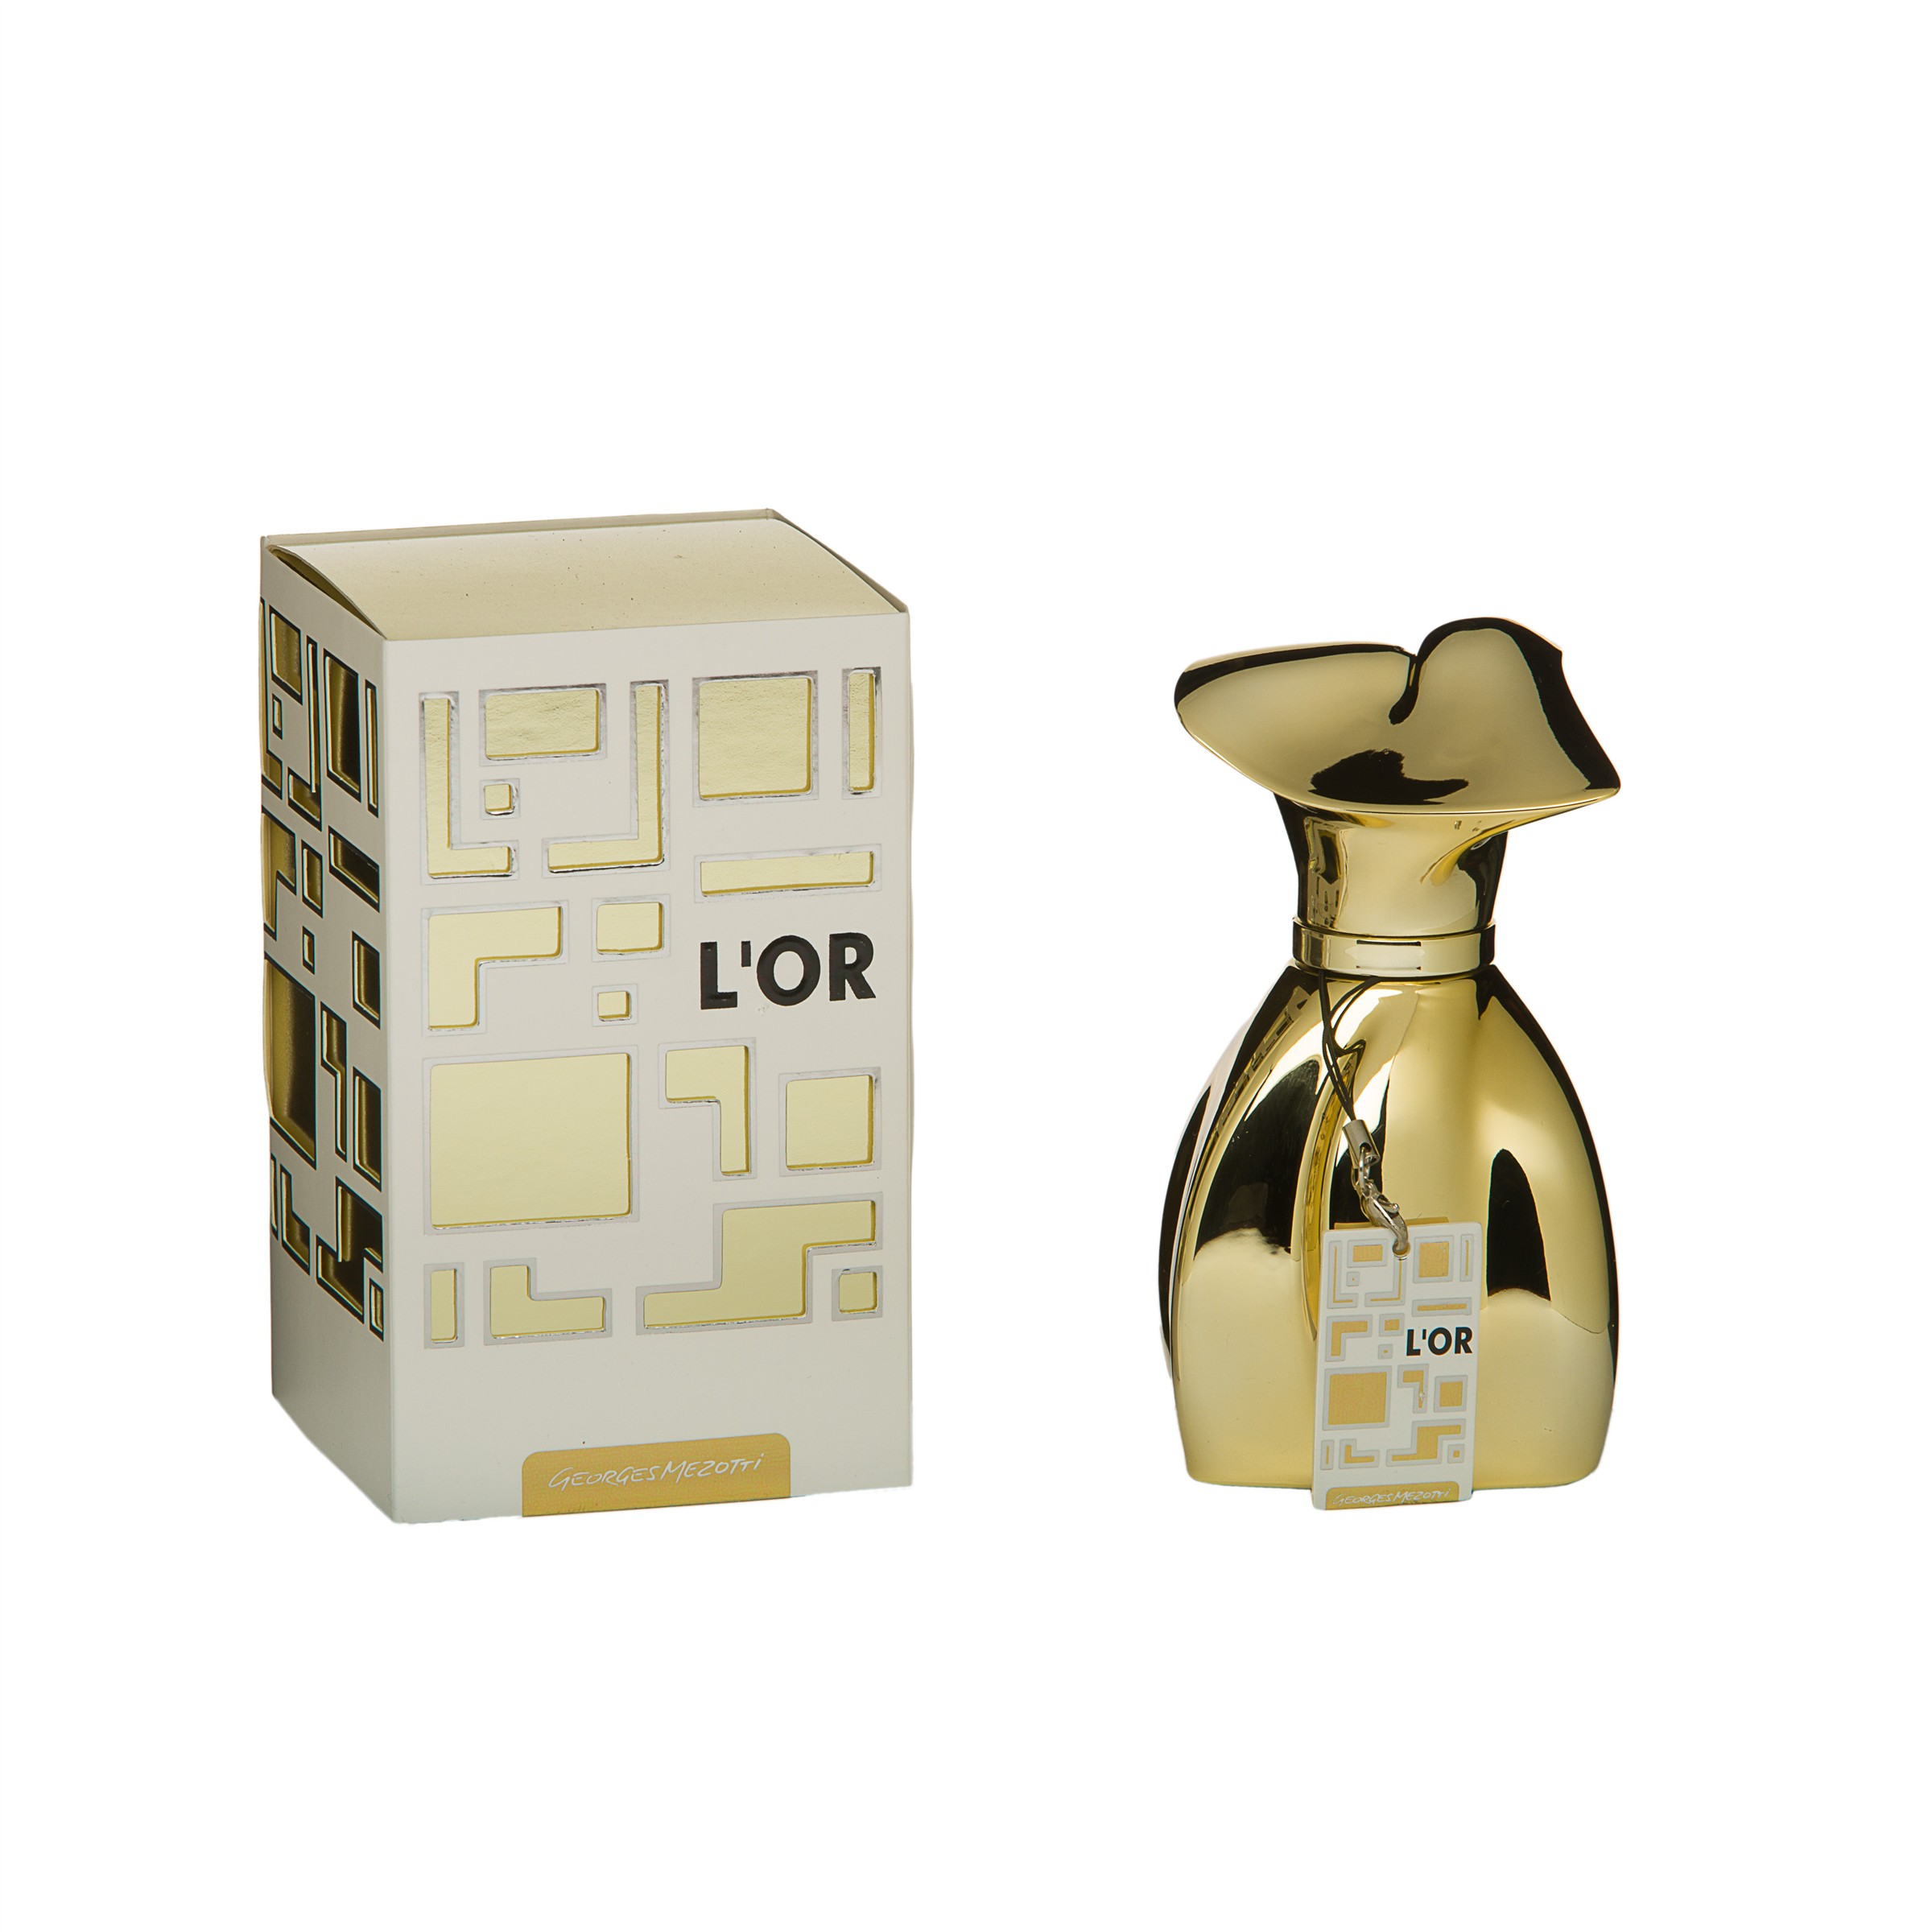 Featured image for “L’OR”